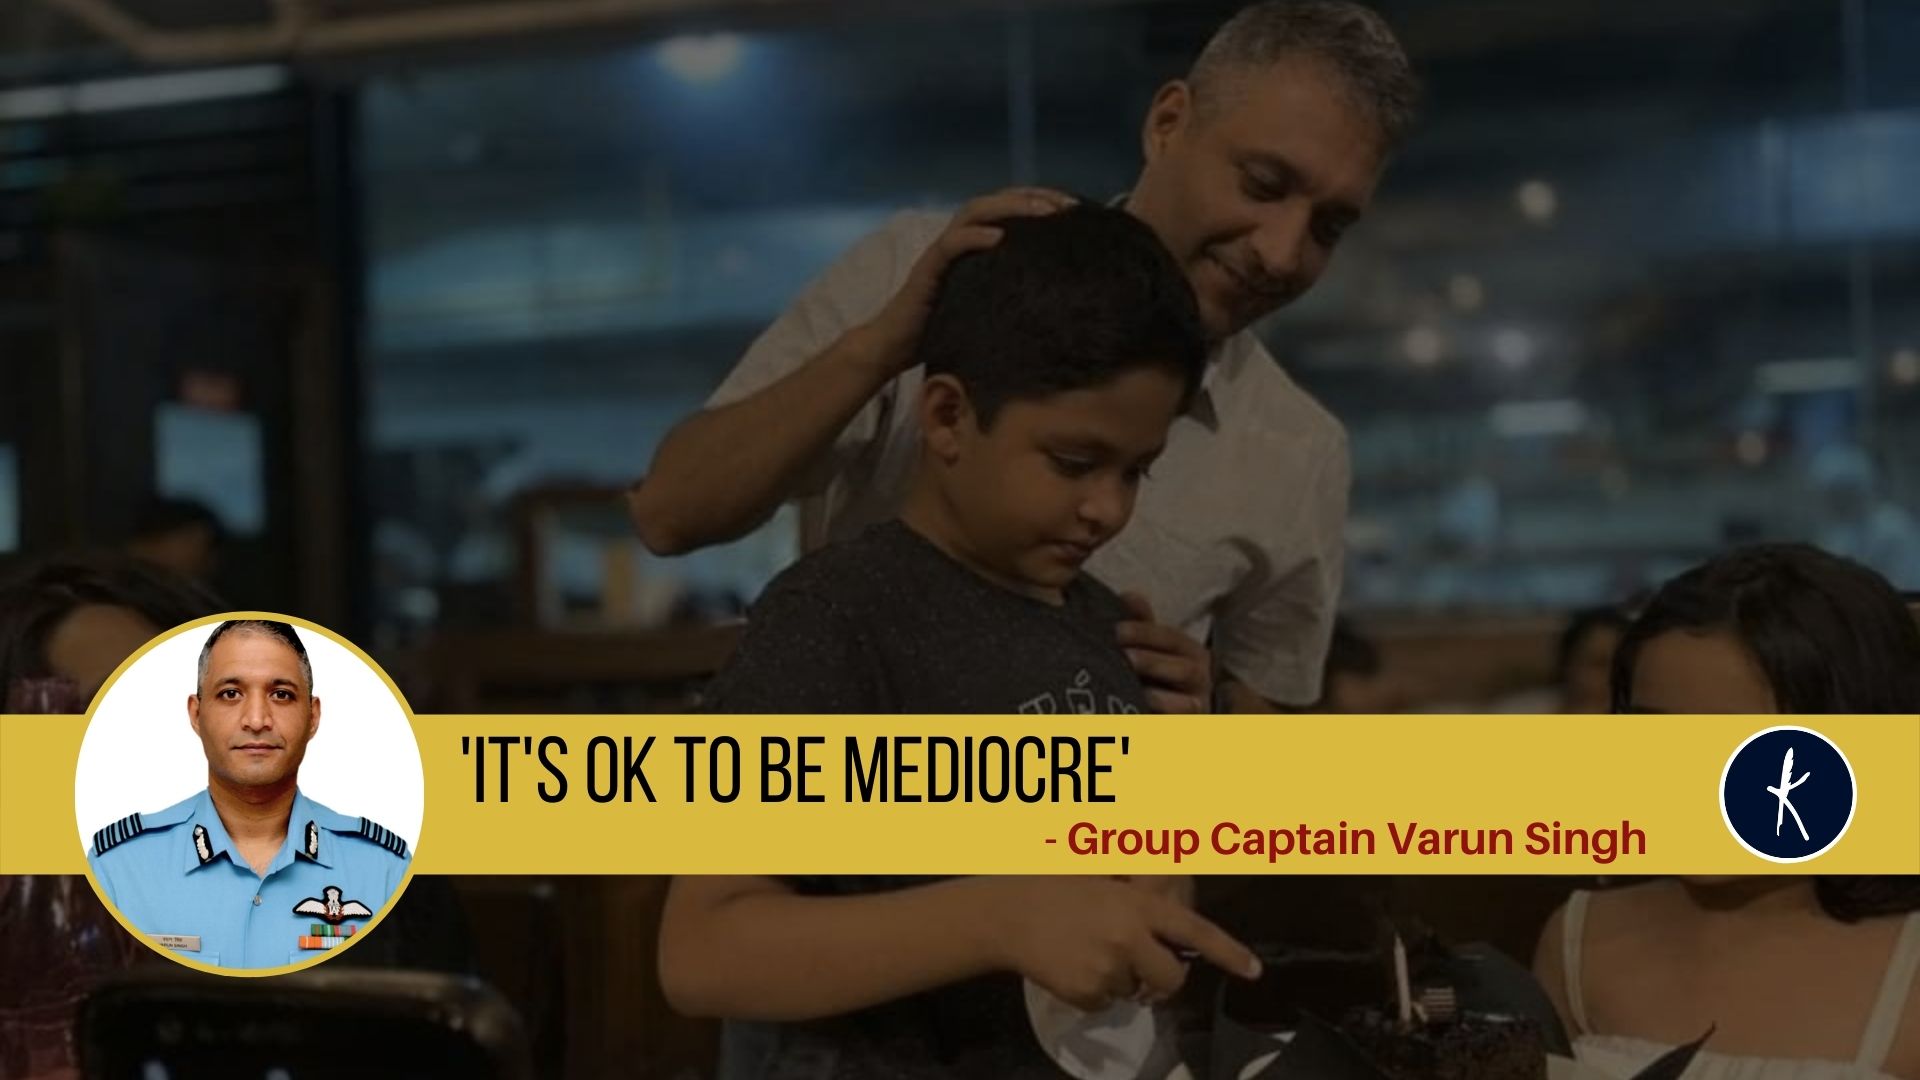 It's ok to be mediocre': Group Captain Varun Singh's image